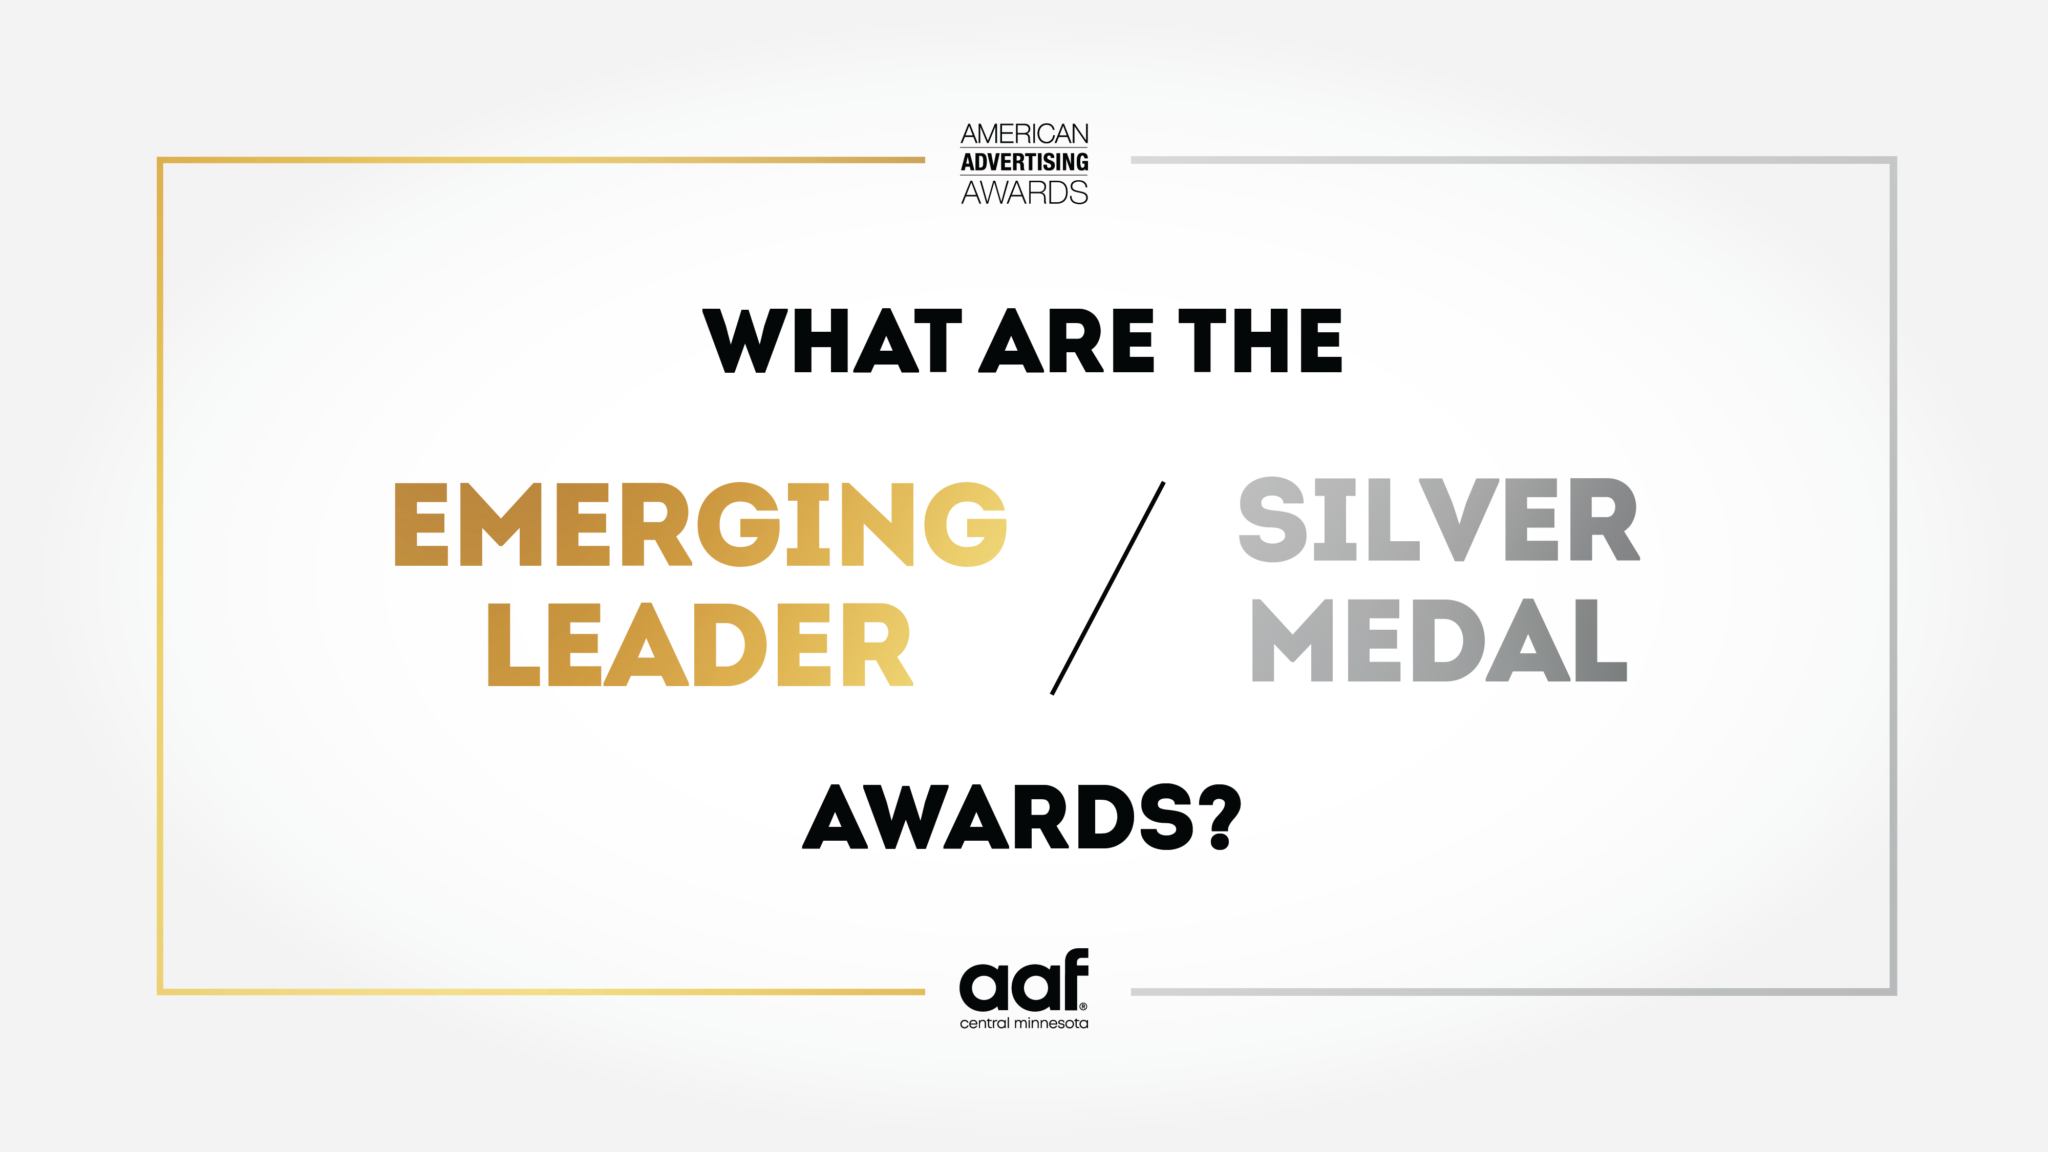 What Are the Emerging Leader and Silver Medal Awards?